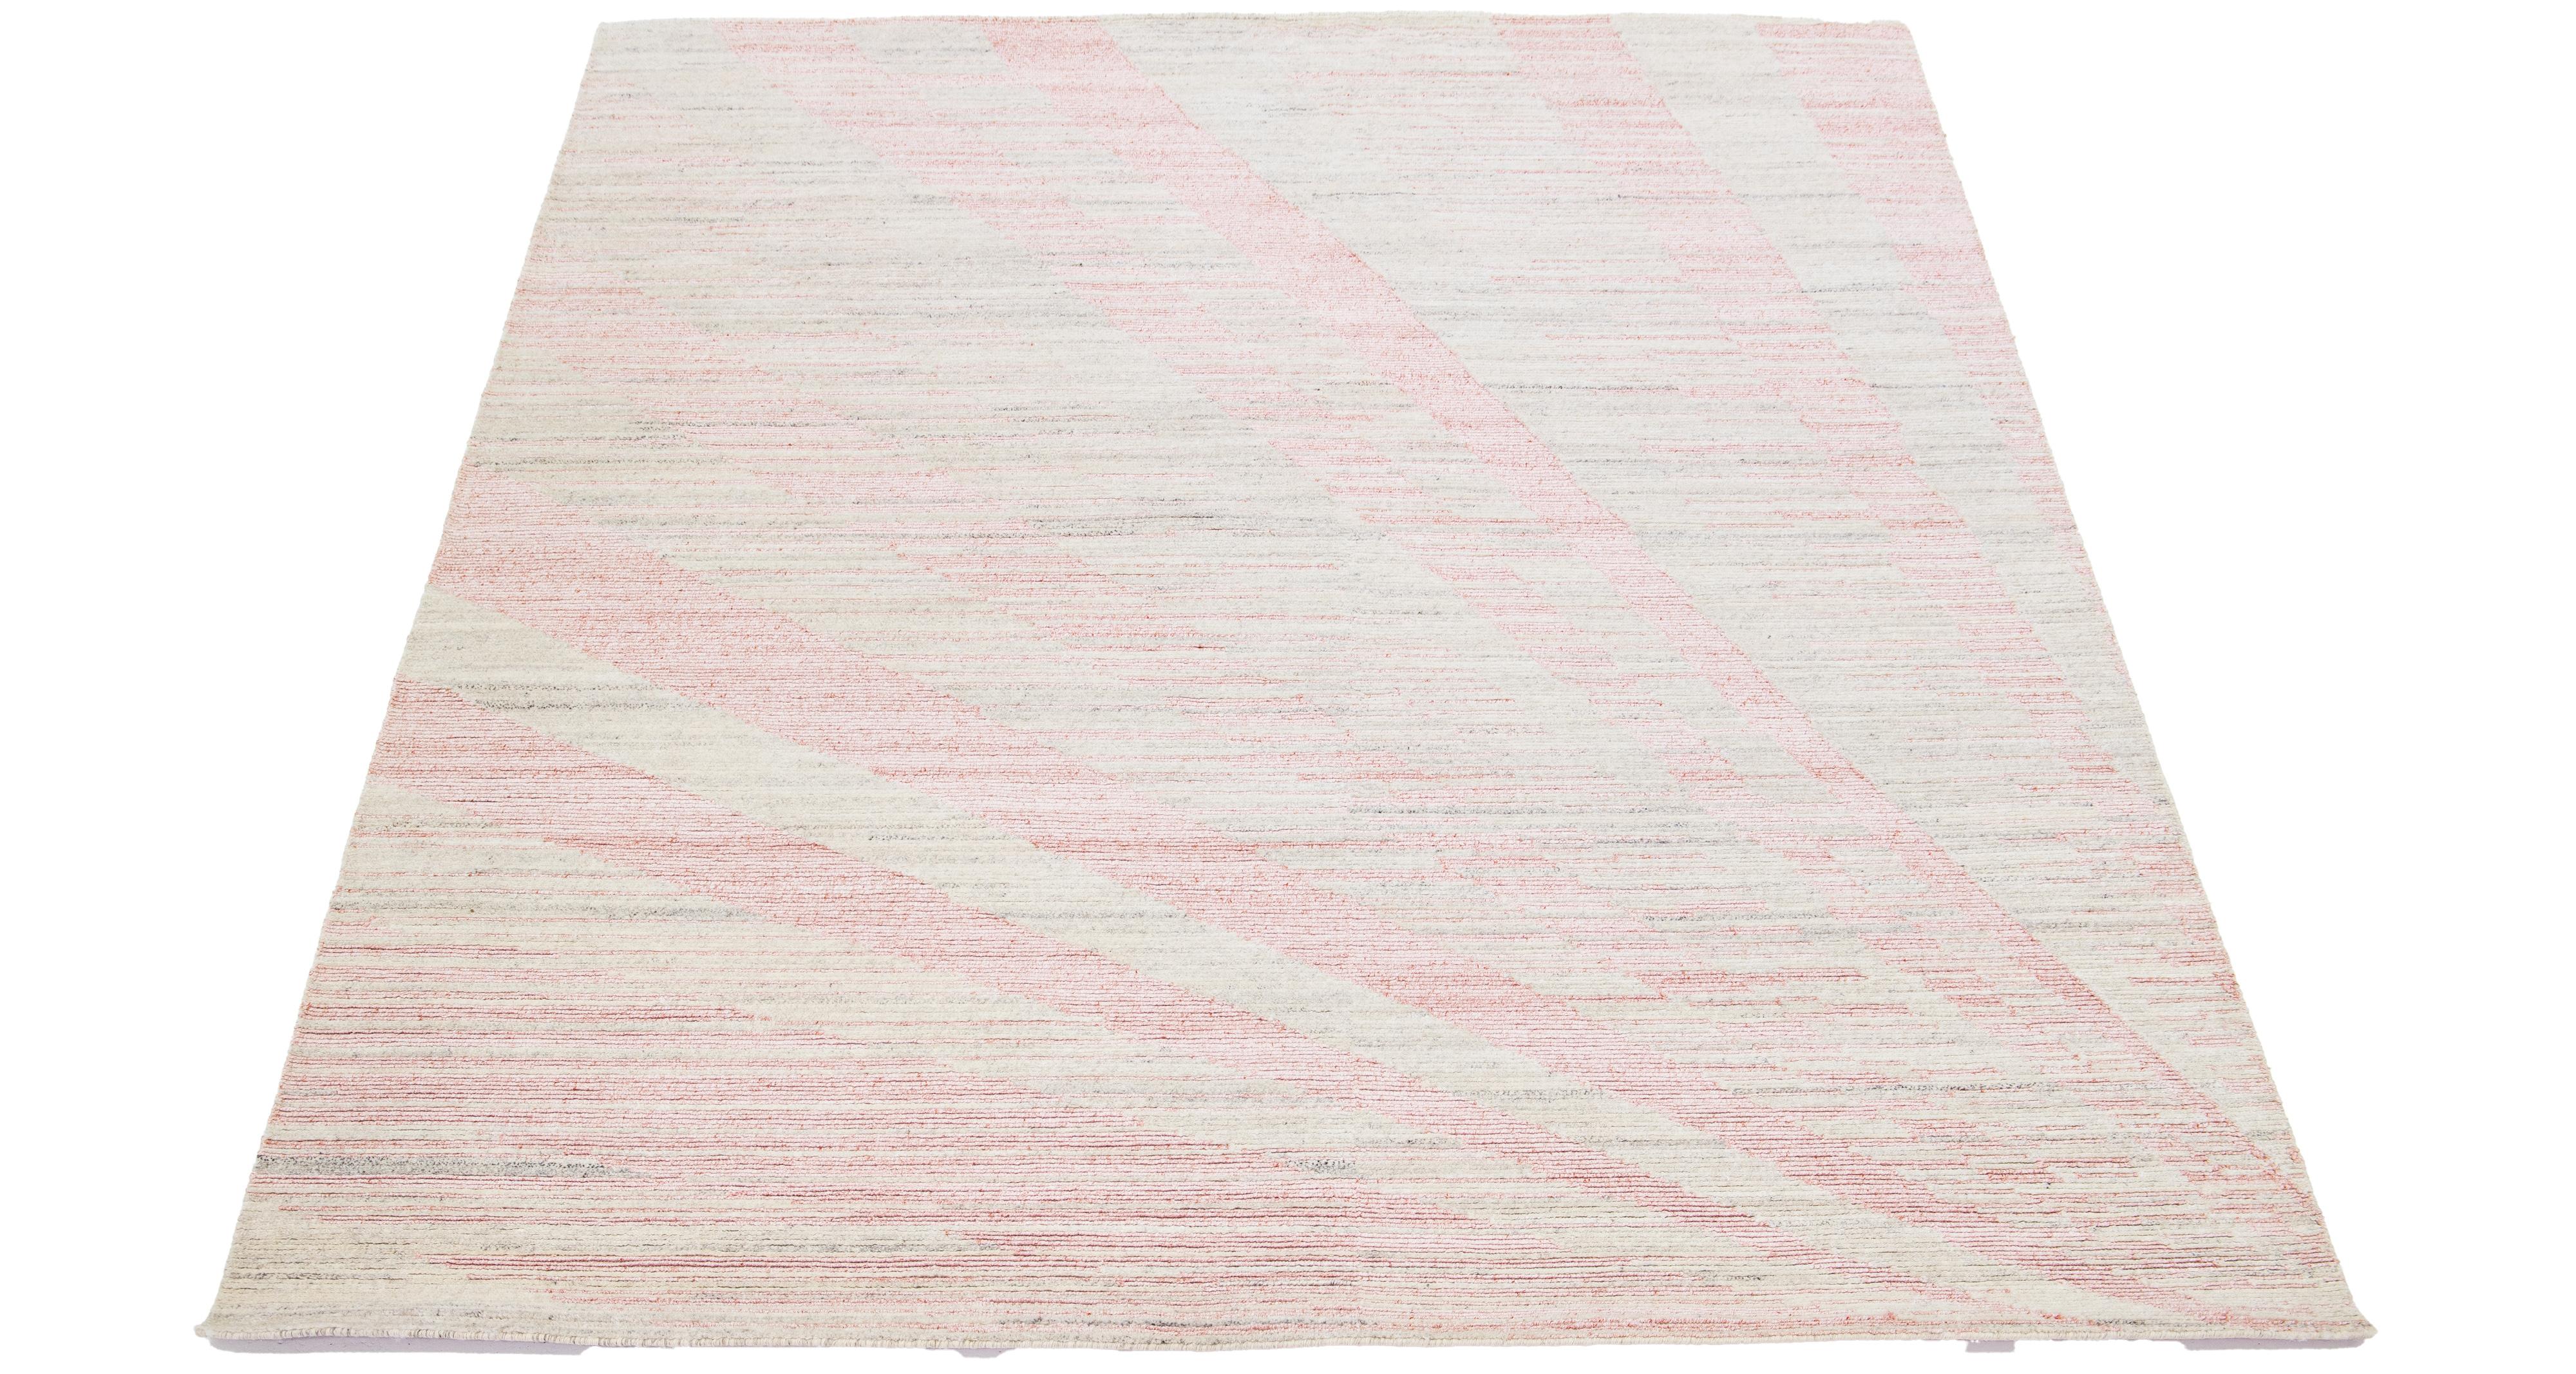 The contemporary art deco wool rug features a captivating abstract beige backdrop with elegant pink embellishments. The exquisitely crafted all-over pattern exudes the essence of modernism, epitomizing its significance in the 21st century.

This rug